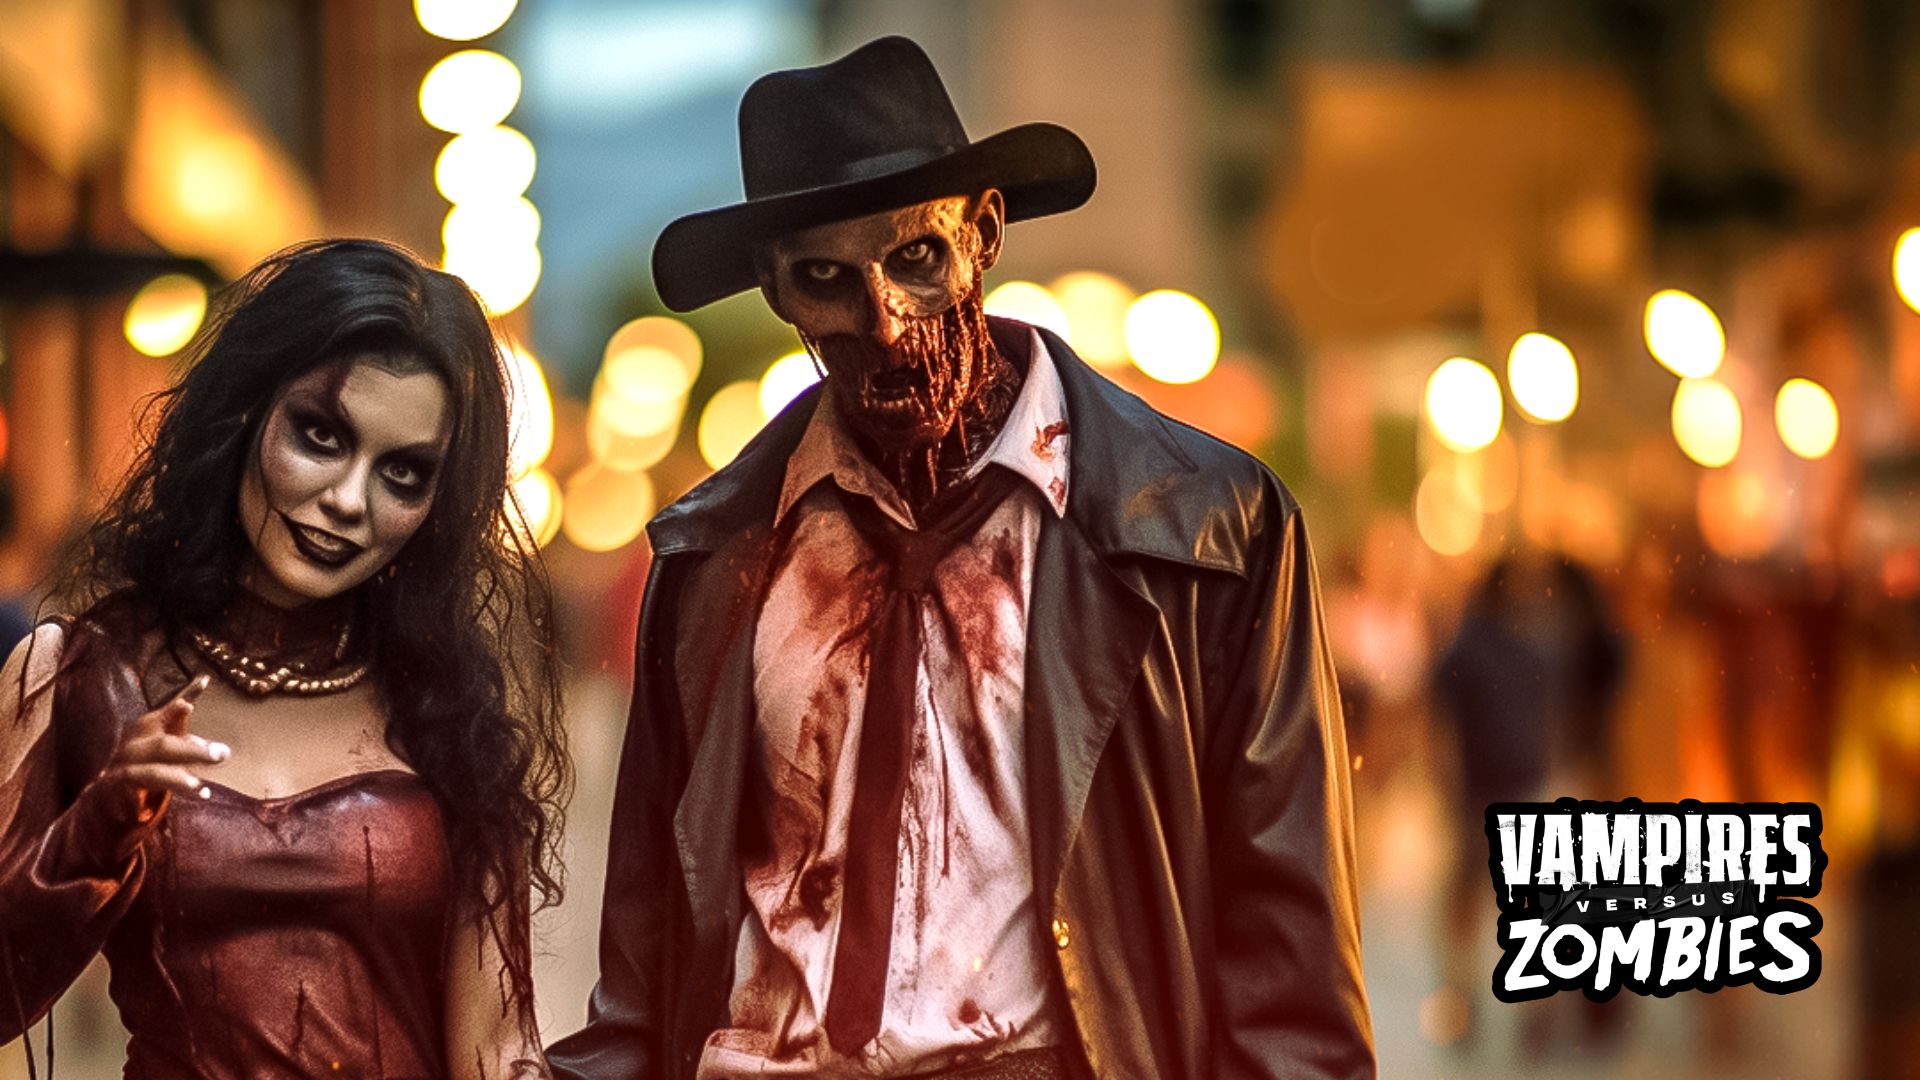 The Vampires vs Zombies Experience  unleashes across the US for Halloween